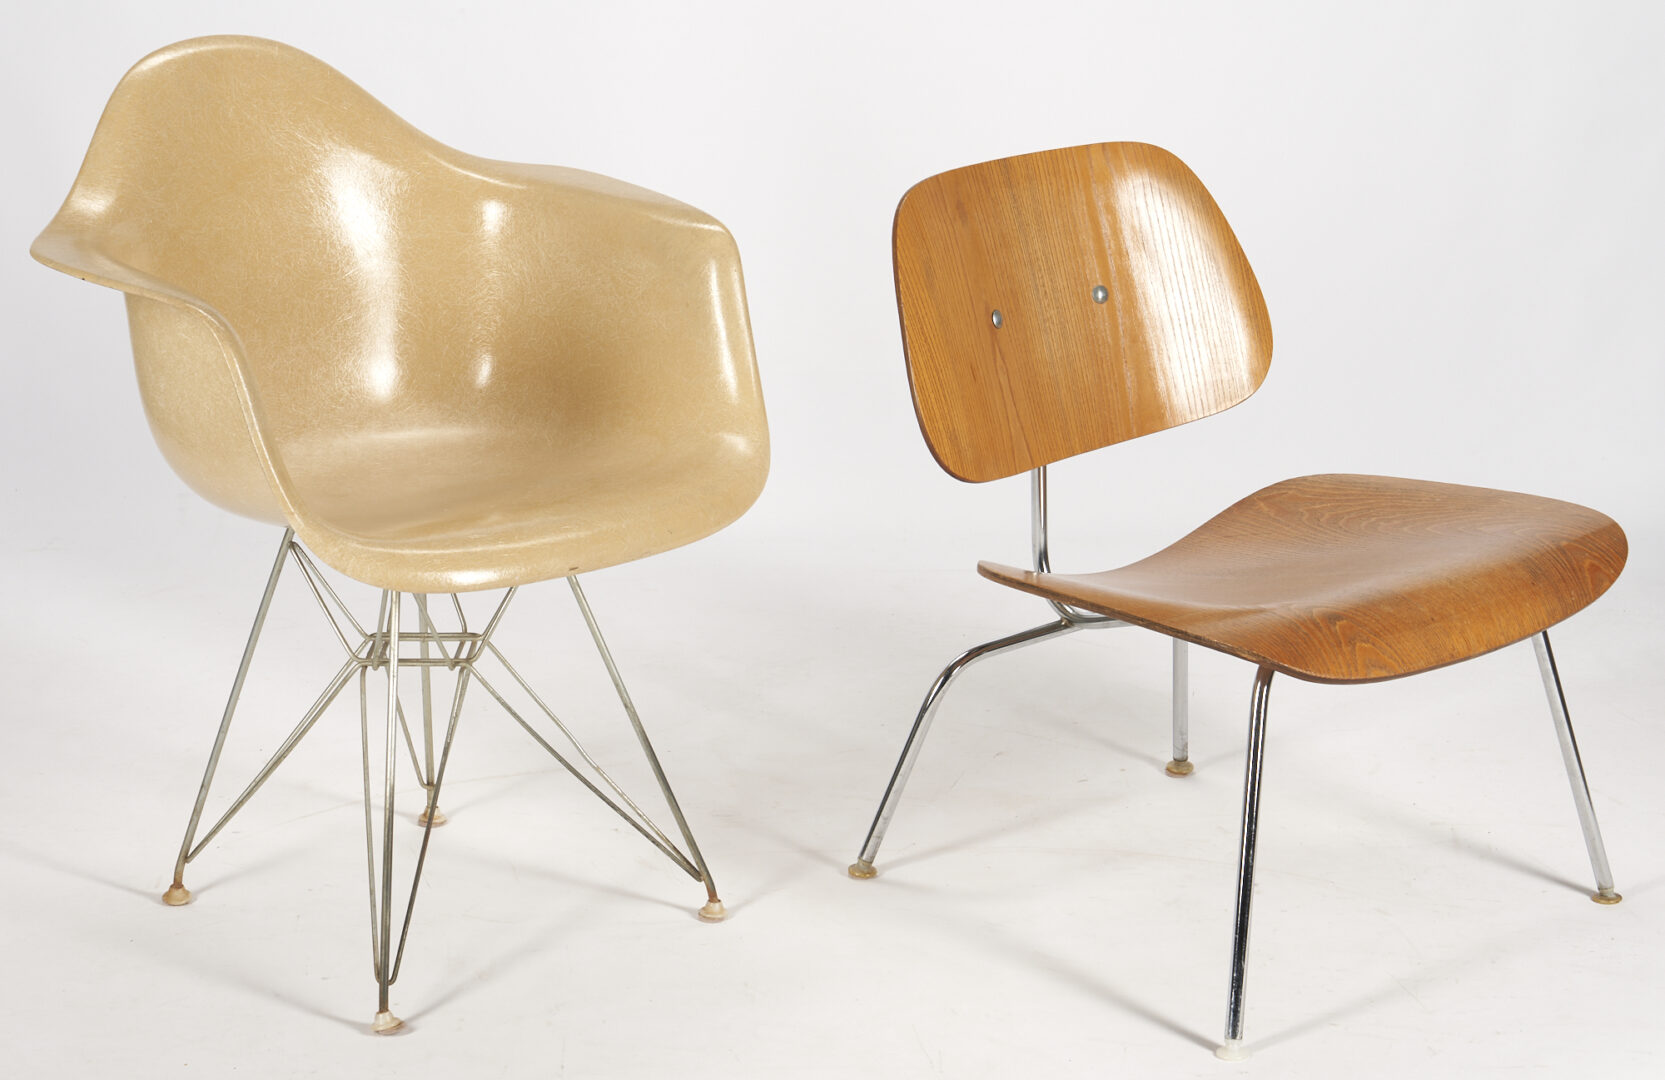 Lot 472: 2 Eames Mid-Century Chairs, Eiffel Fiberglass Shell & Molded Lounge Chair